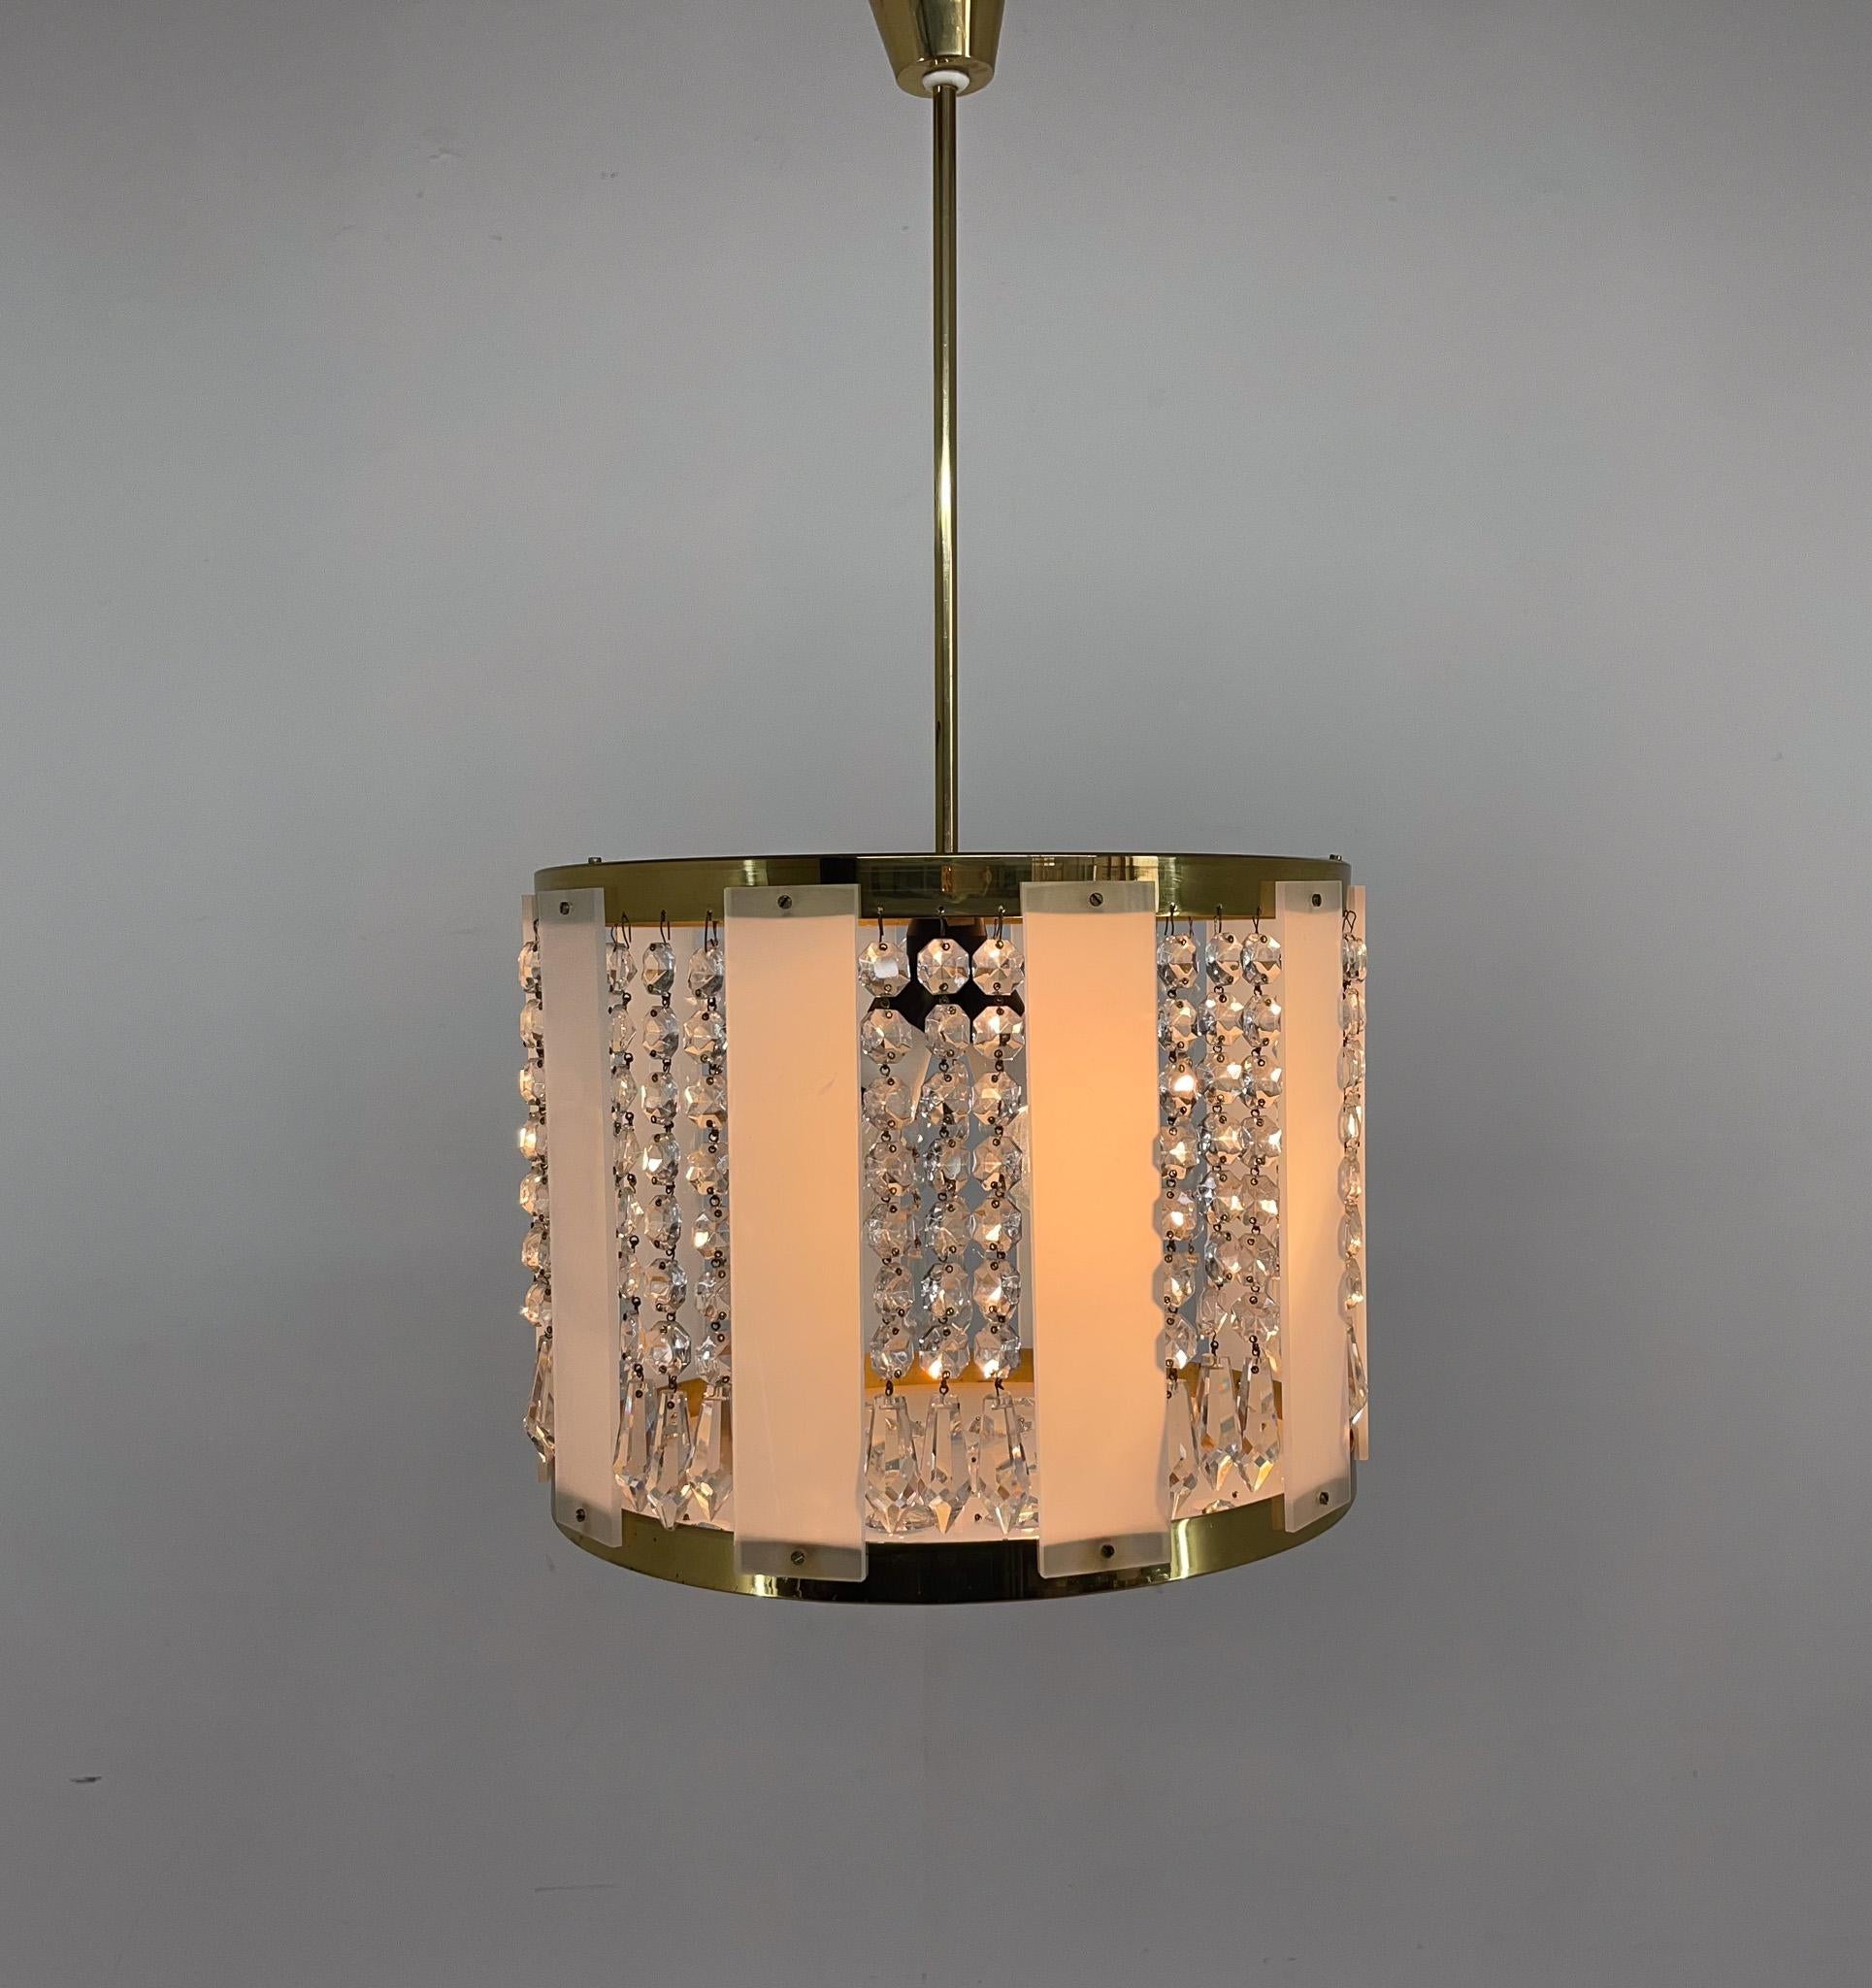 Unusual pendant light, produced in former Czechoslovakia by Novy Bydzov Glassworks. It casts a beautiful light. Matching table lamp available.